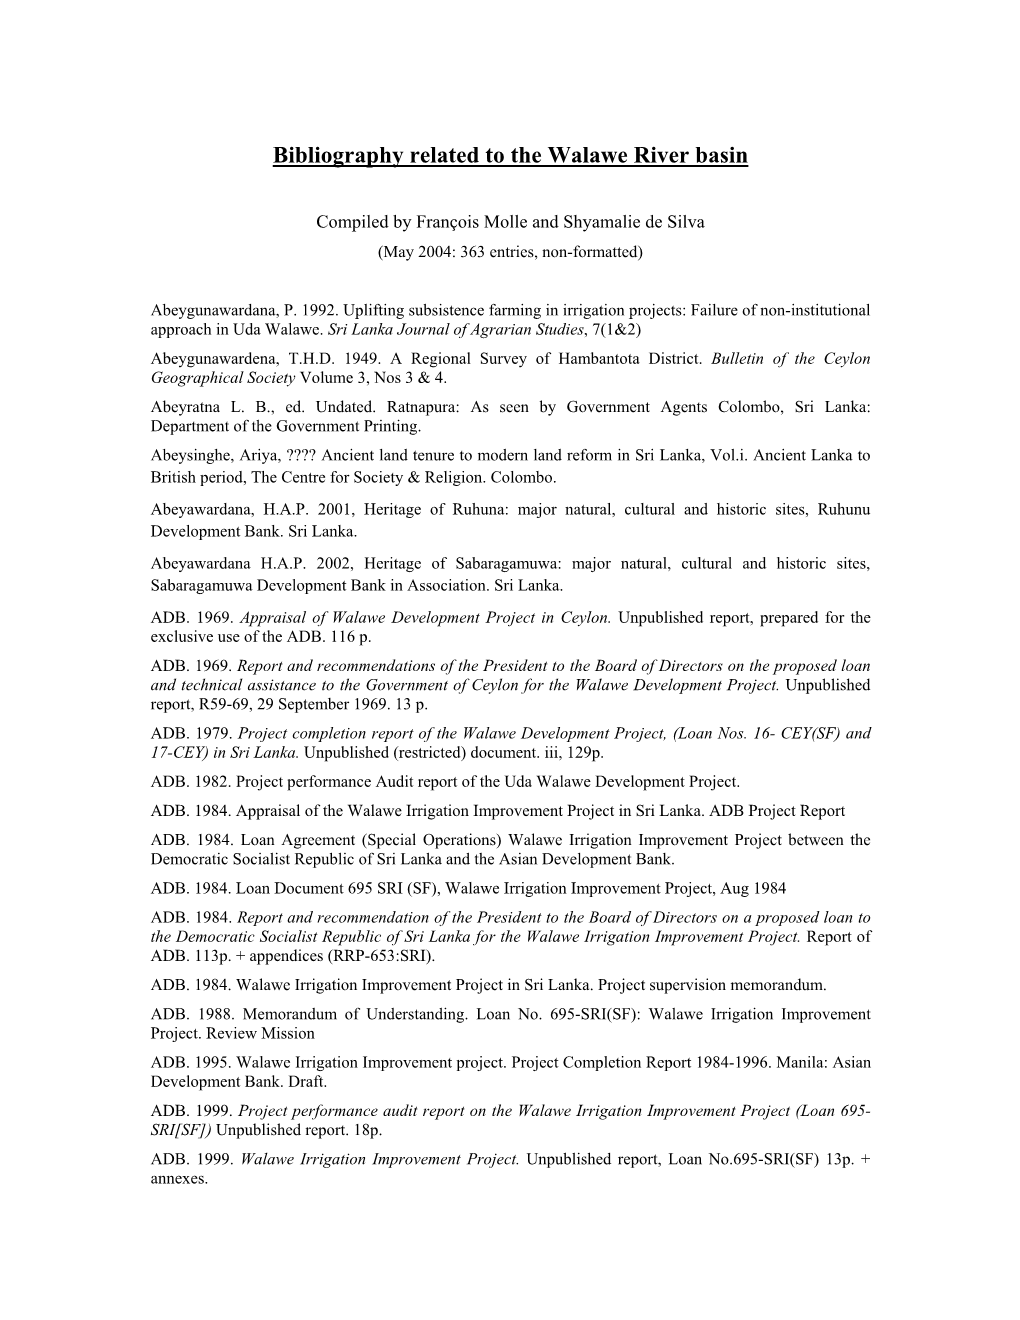 Bibliography Related to the Walawe River Basin